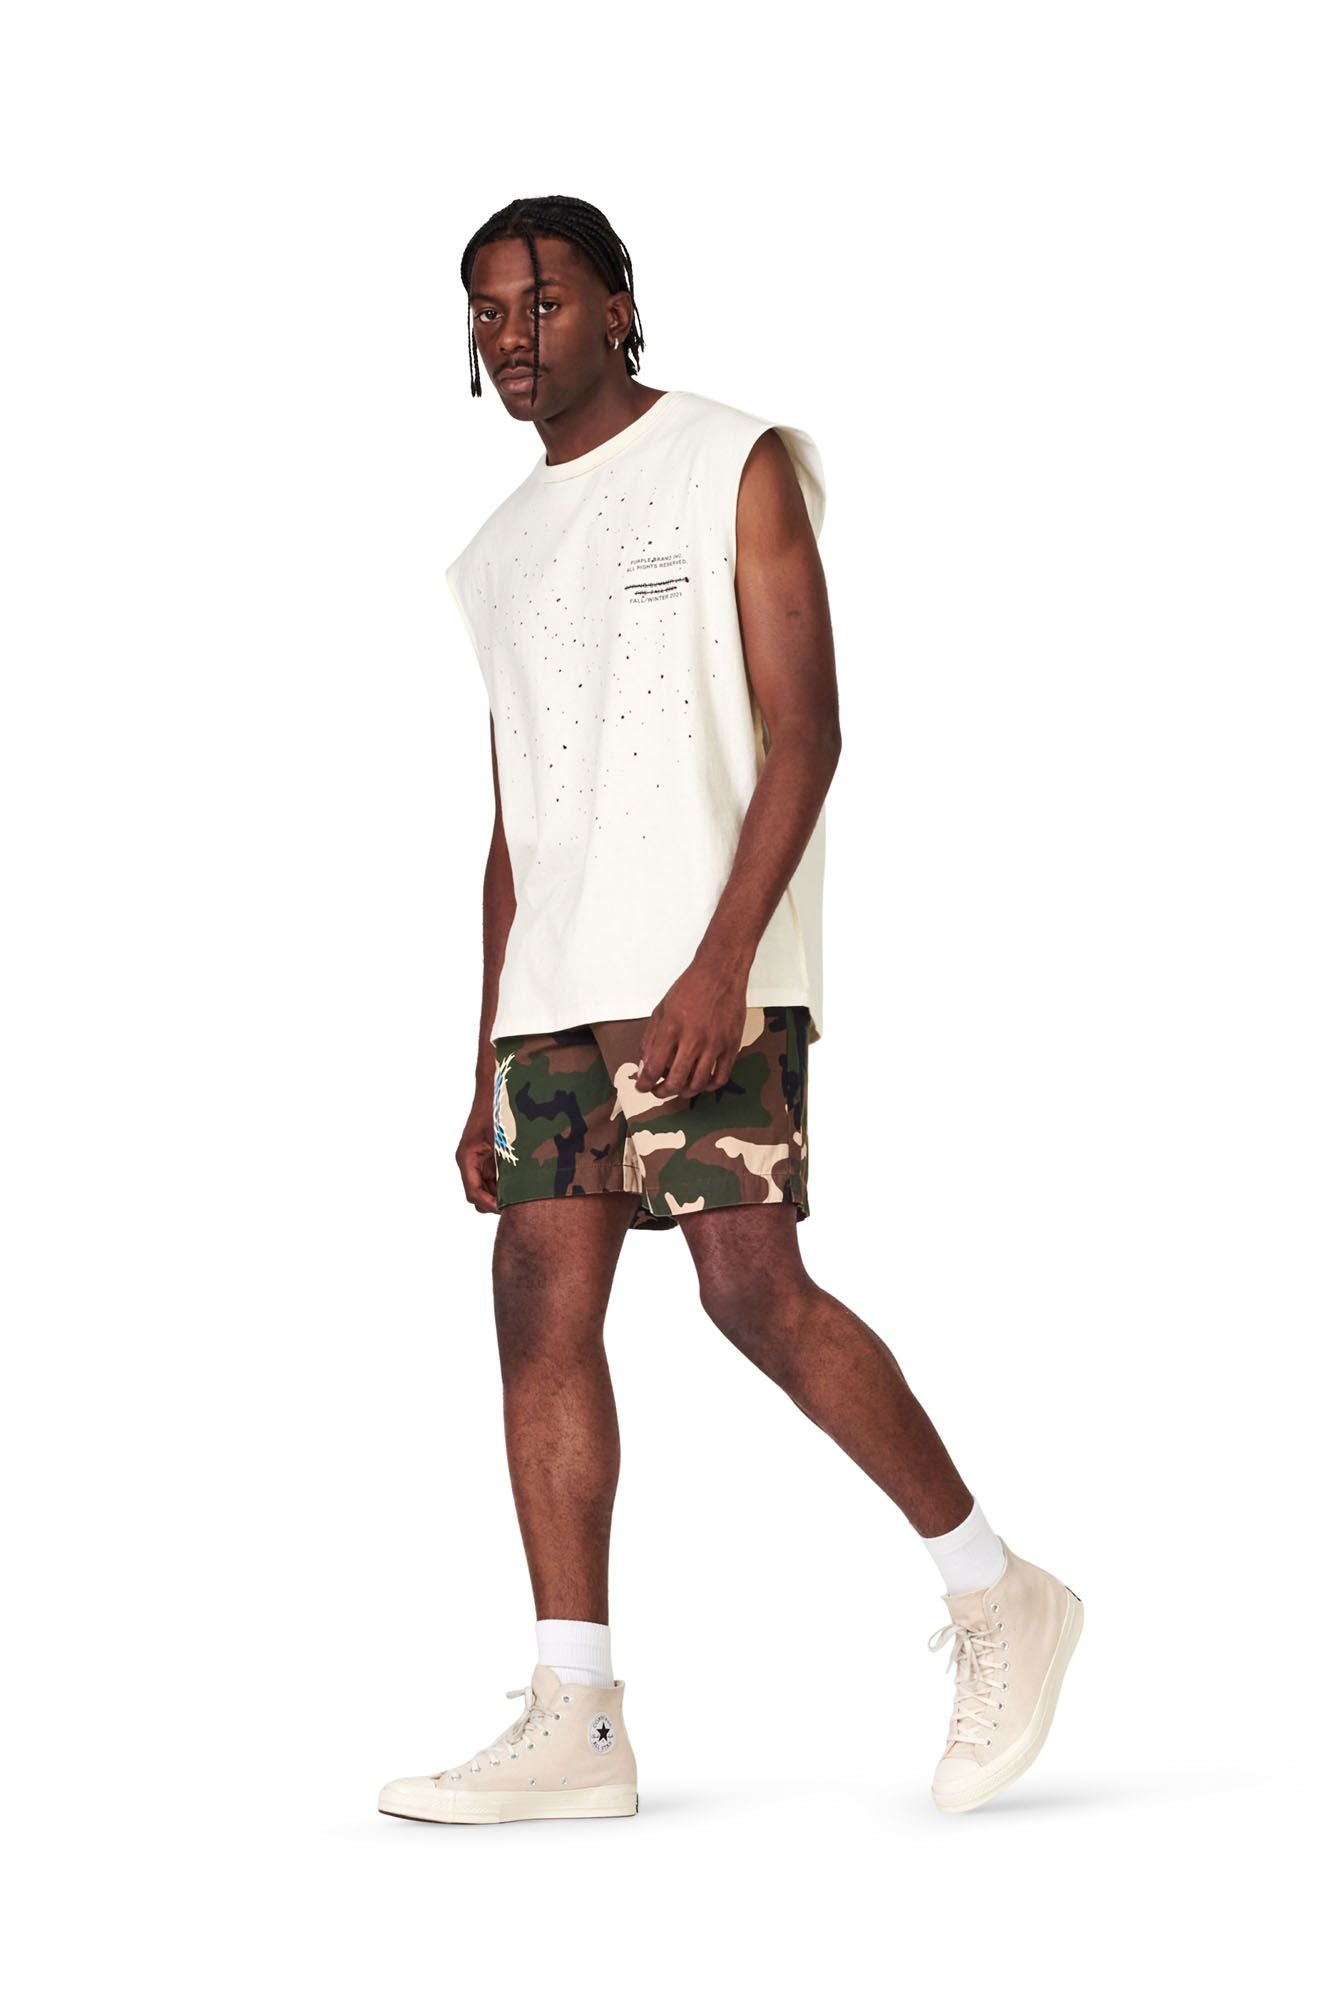 PURPLE BRAND - Men's Short - Style No. P025 - Exclusive Camo Short With Blue Star Print - Model Styled Pose